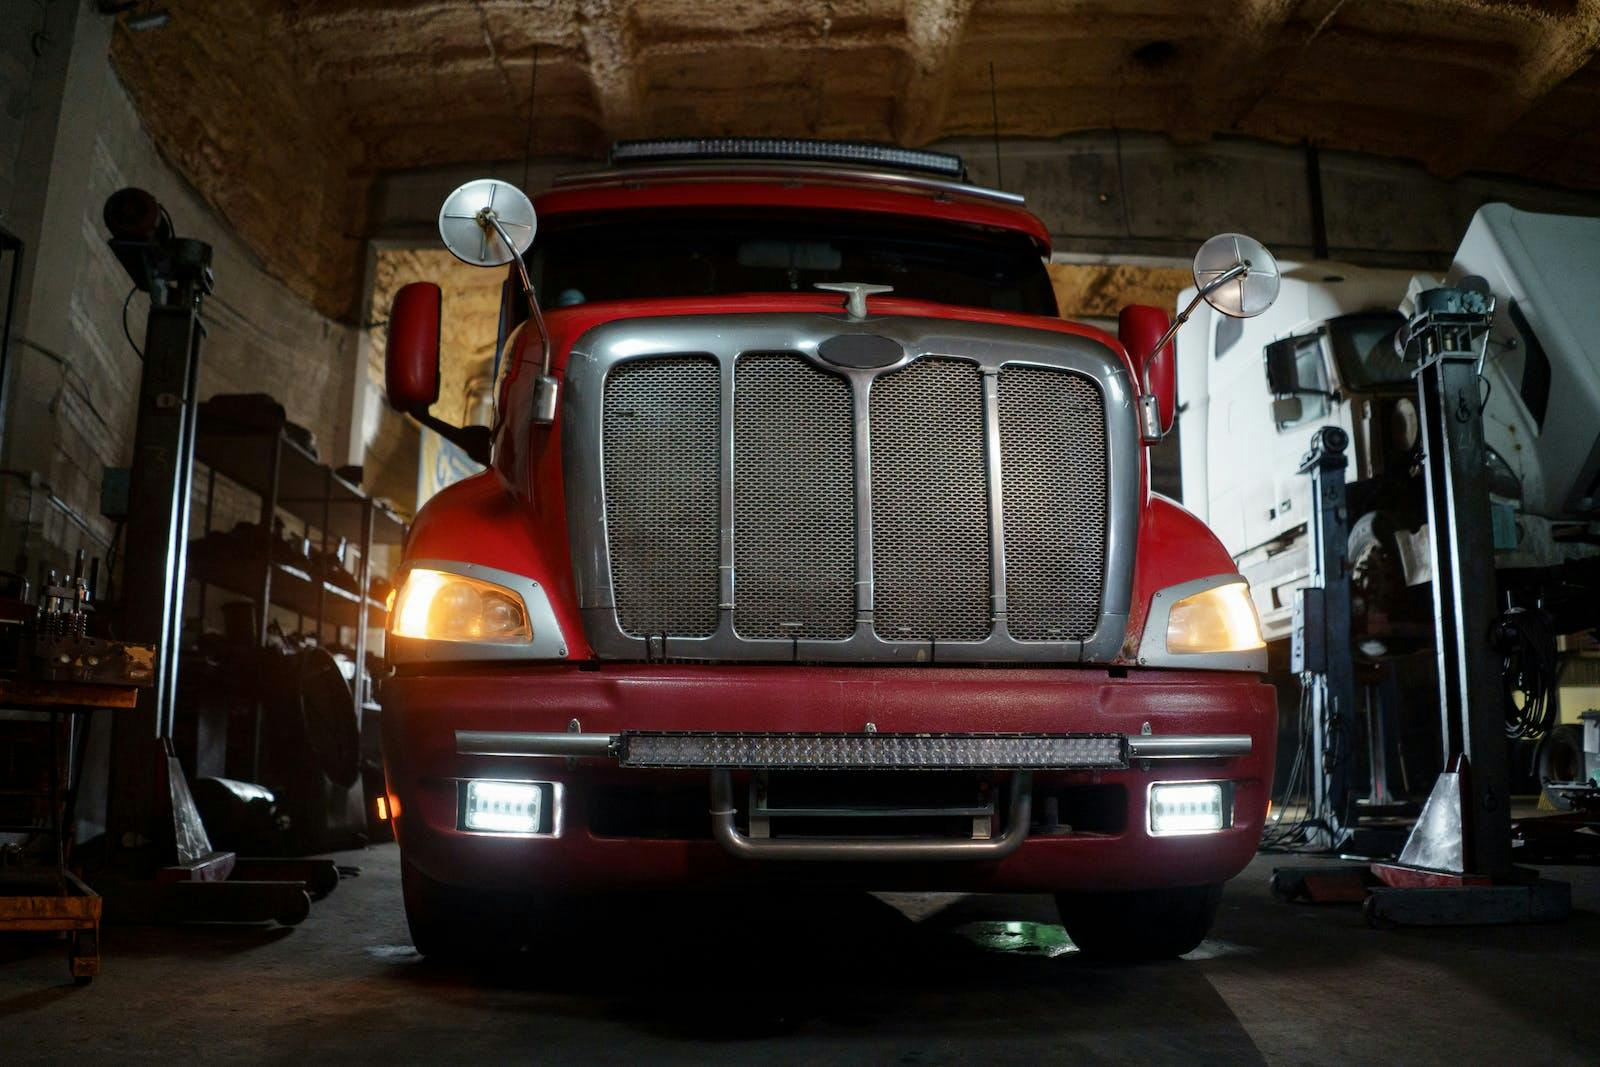 Explore why engine repair is a smart choice for big trucks, offering cost savings, faster turnaround, eco-friendliness, and support for local businesses.